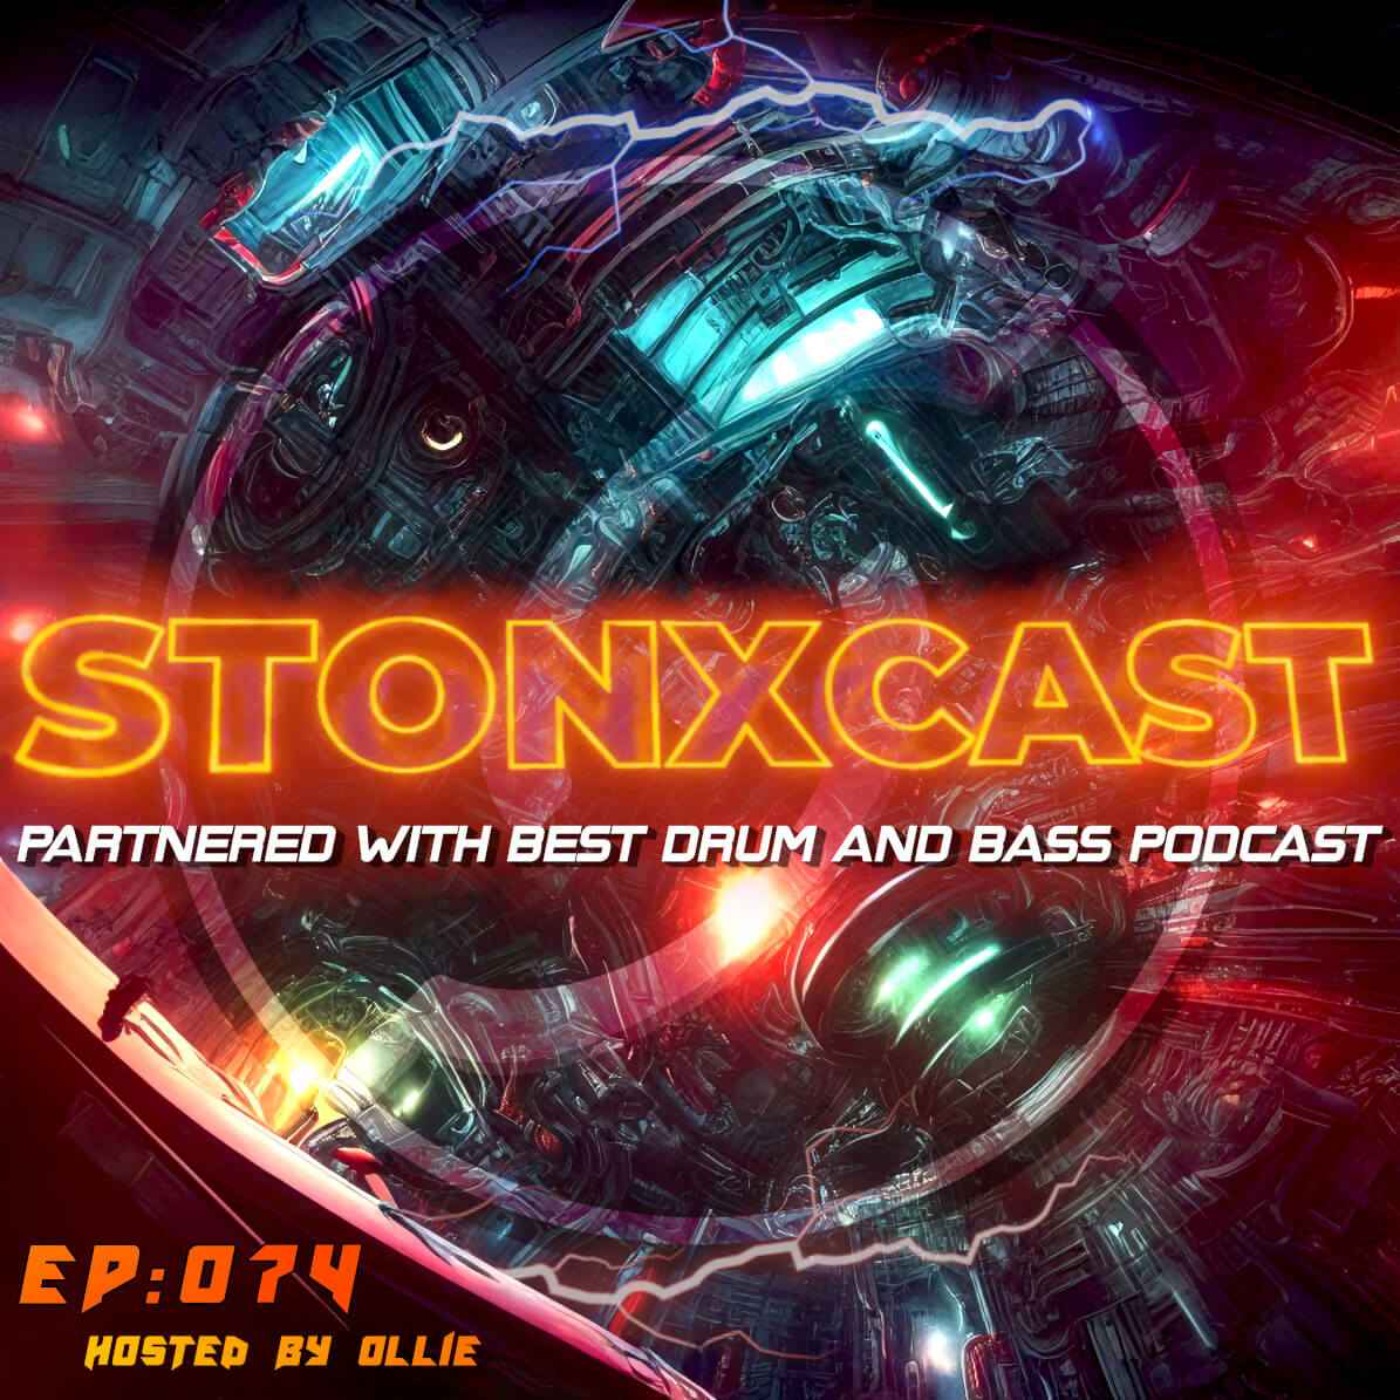 Stonxcast EP:074 - Hosted by Ollie Artwork